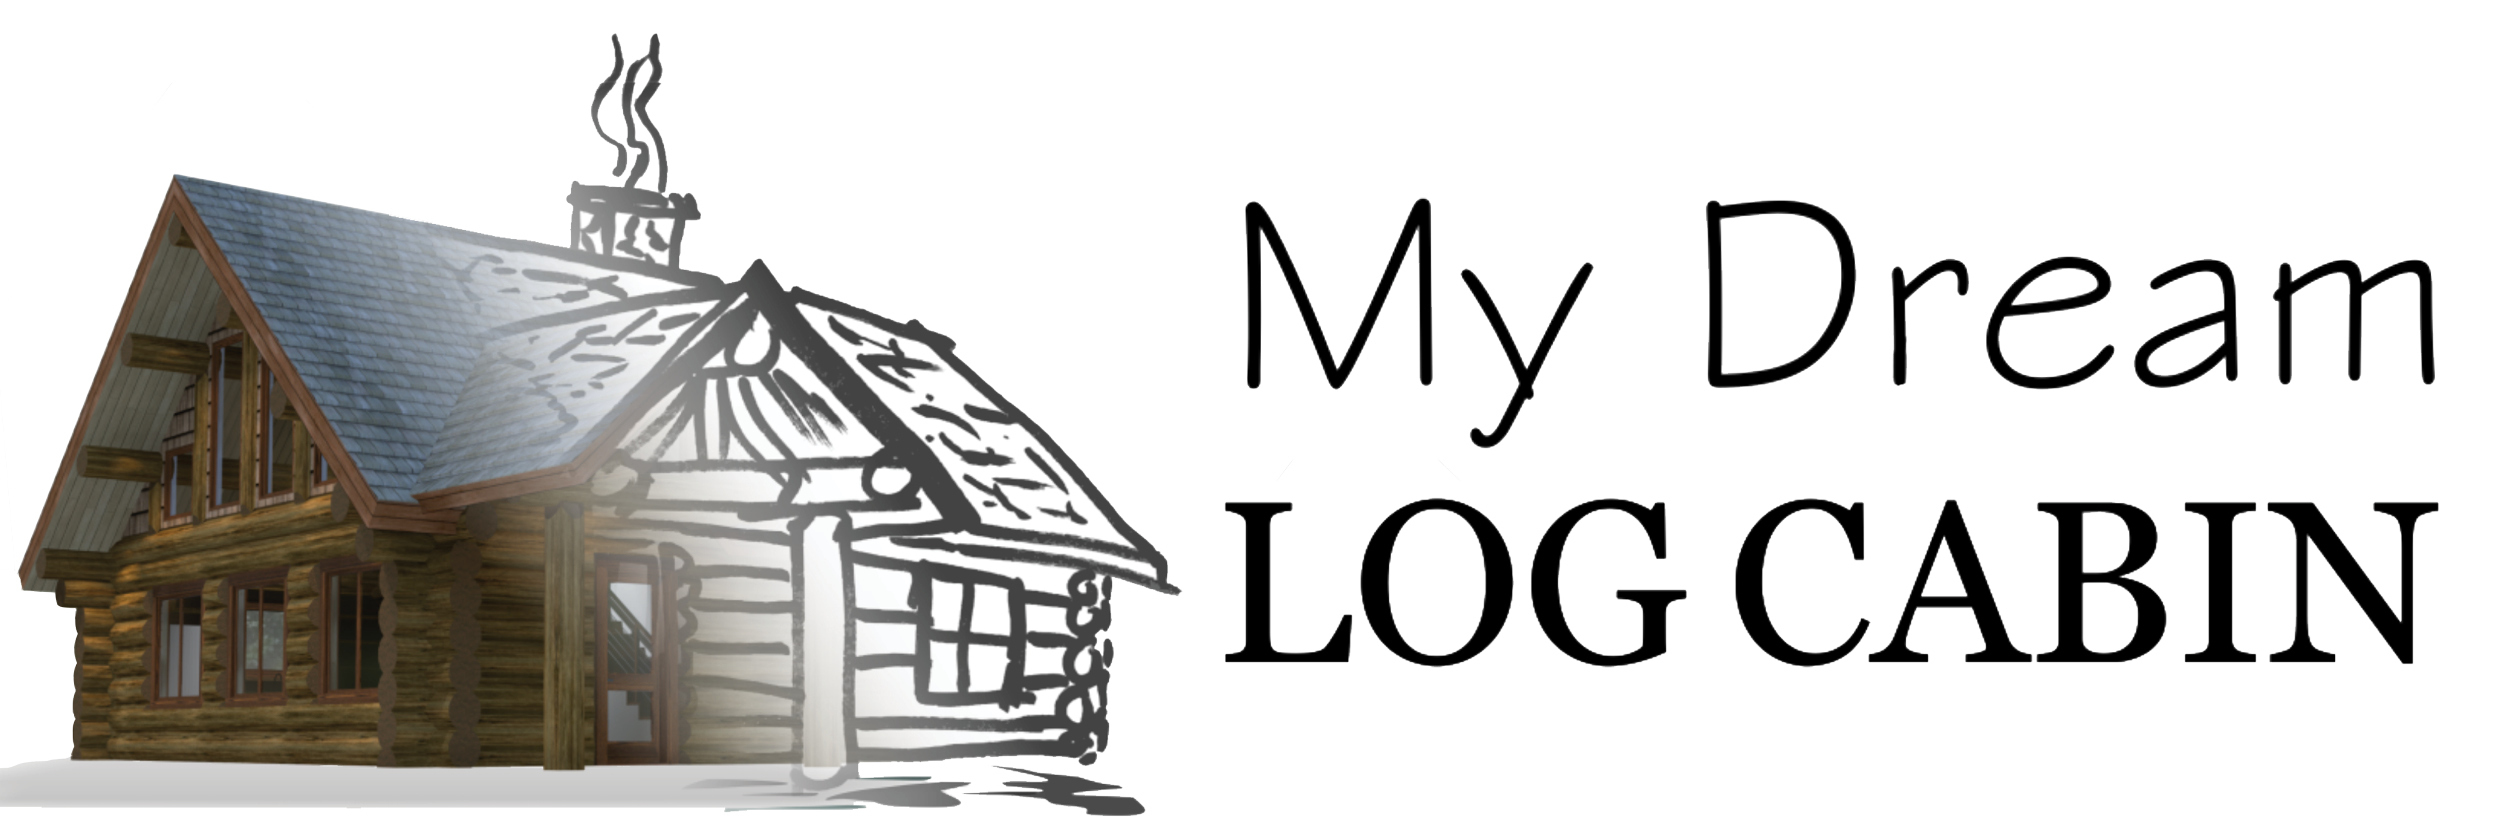 My Dream Log Cabin- Log Cabin Construction Discussion and Stories of How Others Achieved The Log Cabin Dream - Tune In to learn more about how you can live the log cabin lifestyle!